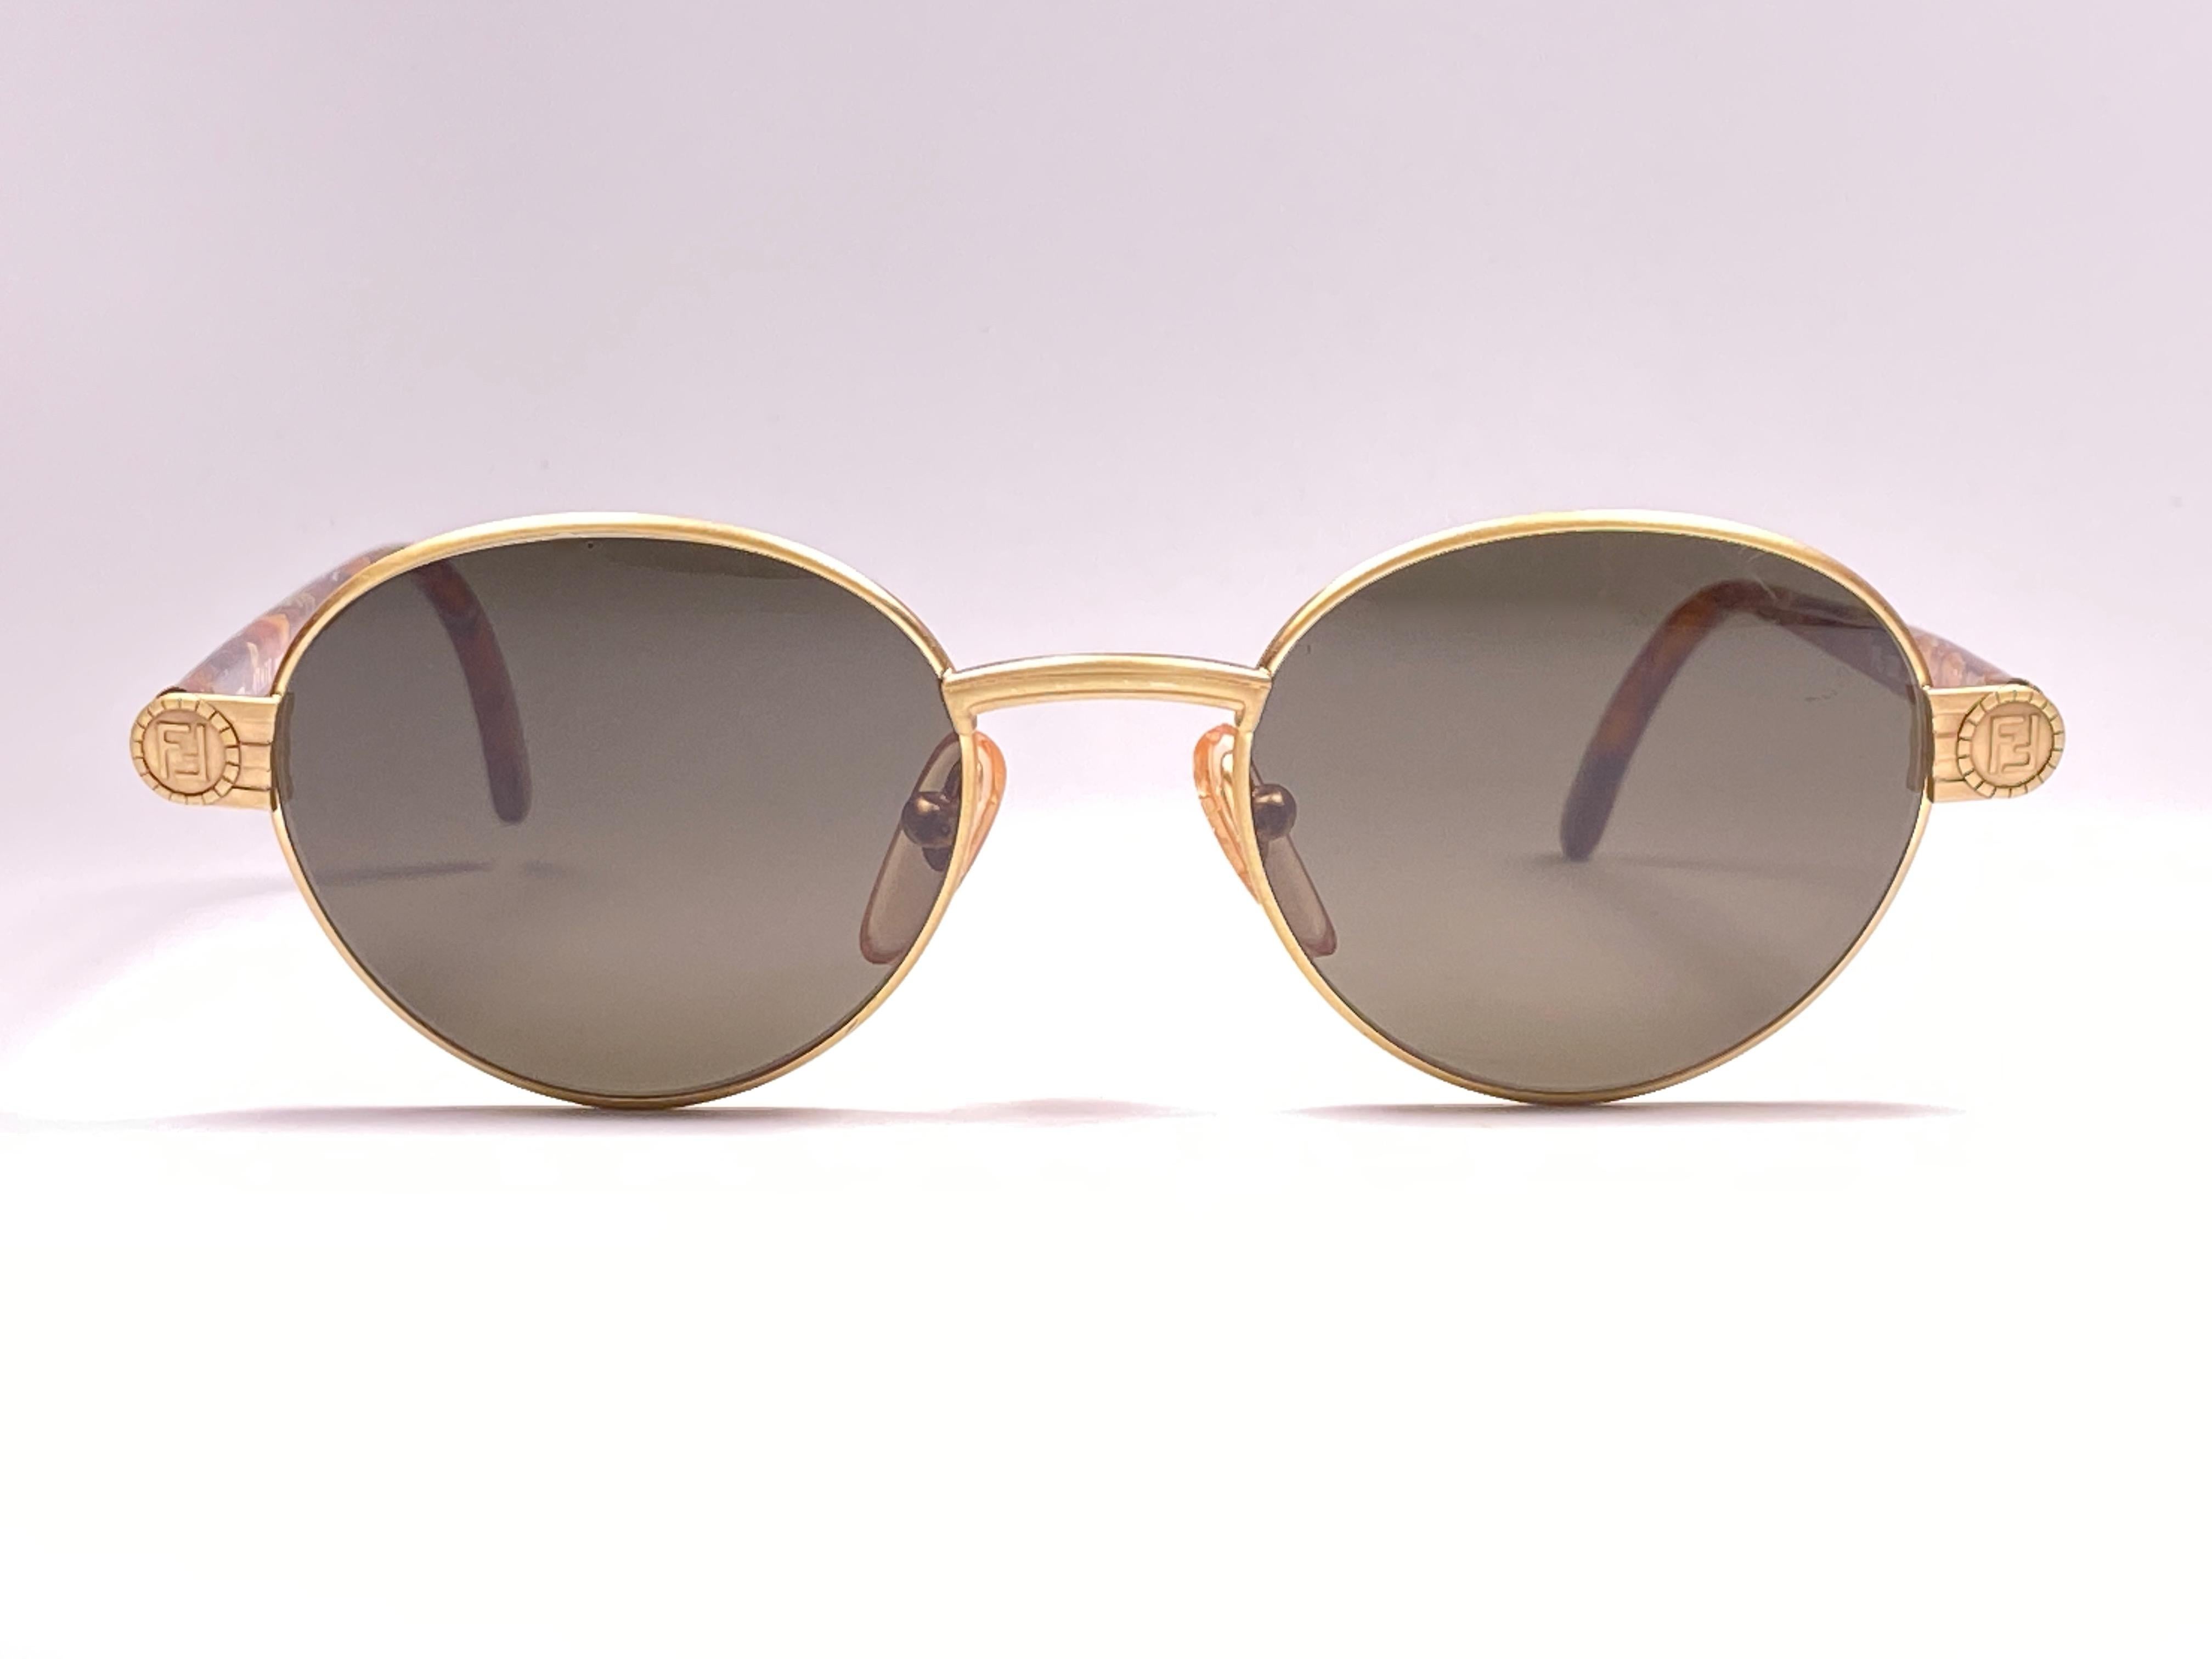 New Fendi gold matte oval frame with solid grey ( UV protection ) lenses.

Made in Italy.
 
Produced and design in 1990's.

New, never worn or displayed. this  item may show minor sign of wear due to storage.